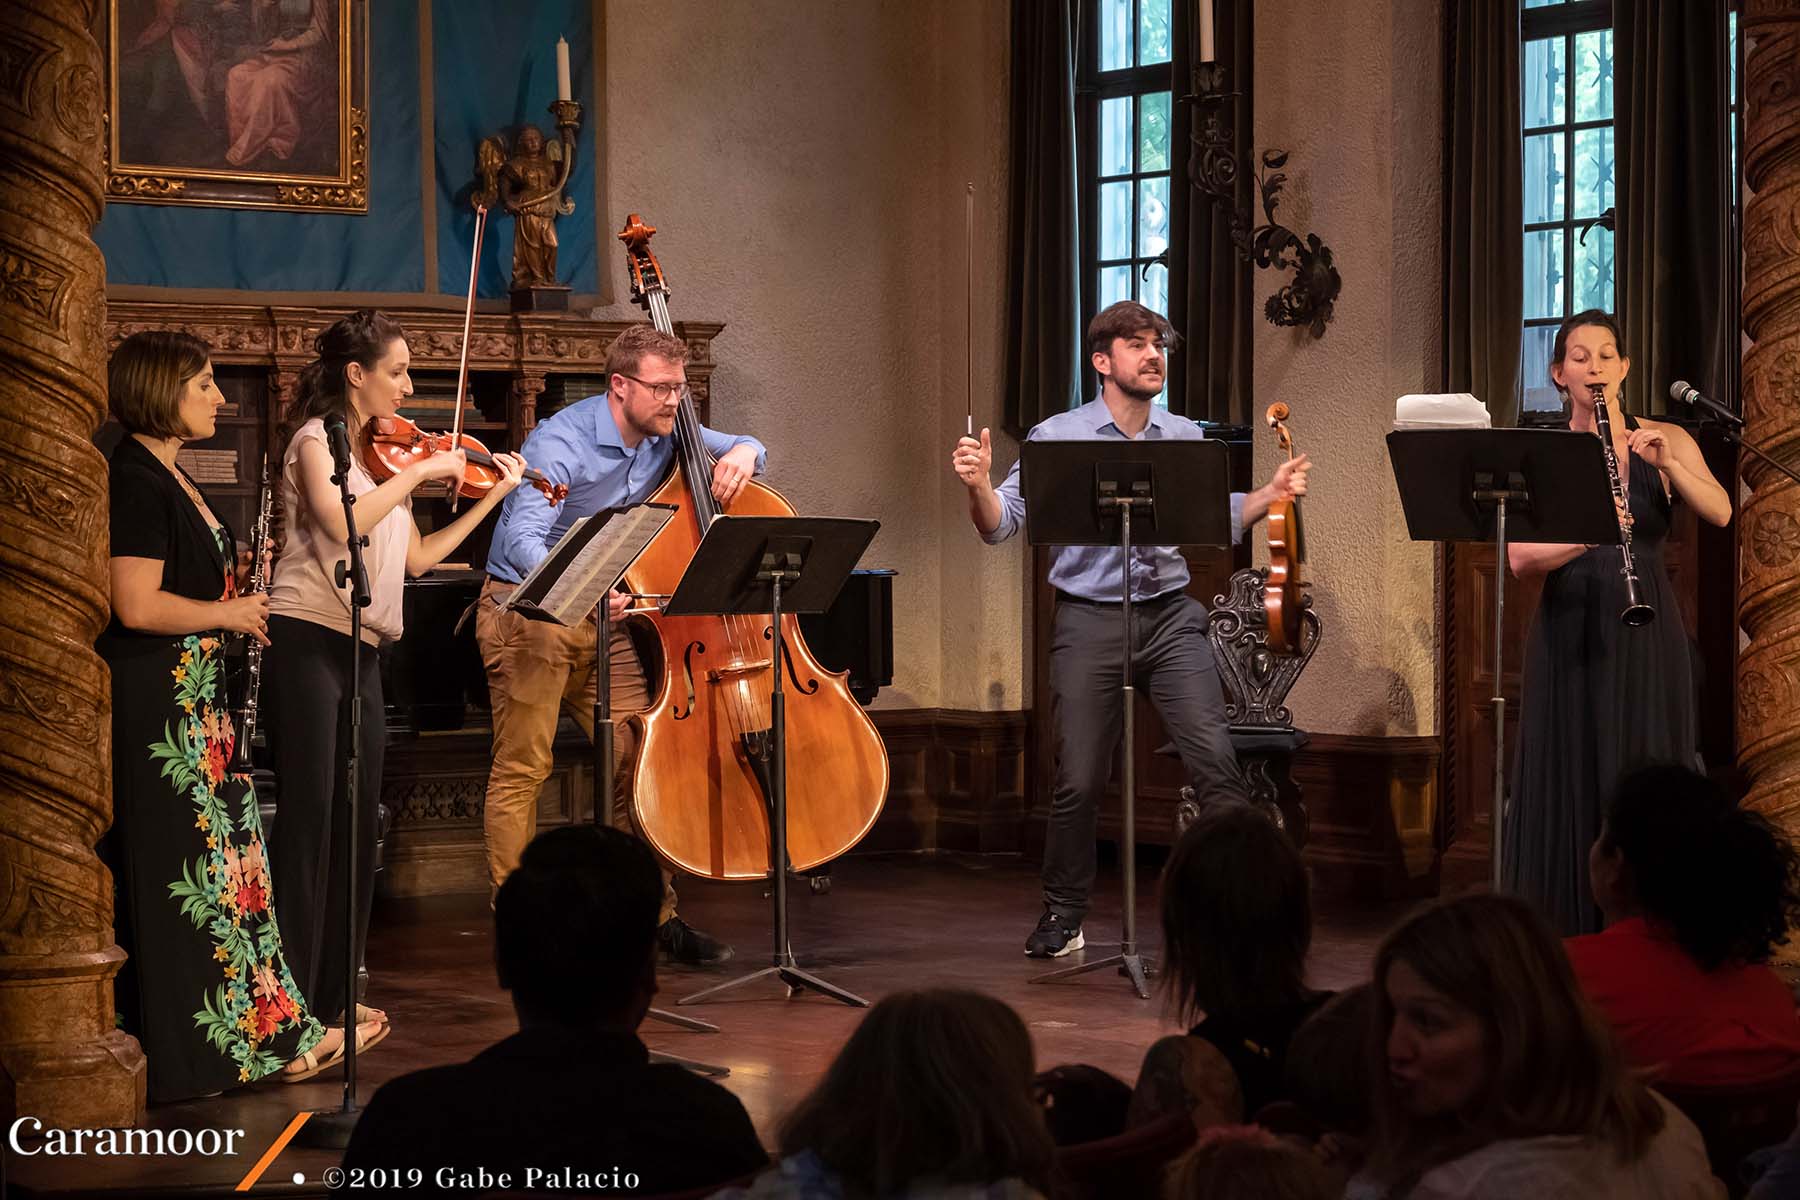 Decoda, an instrumental ensemble whose mission is bringing classical music to new audiences.